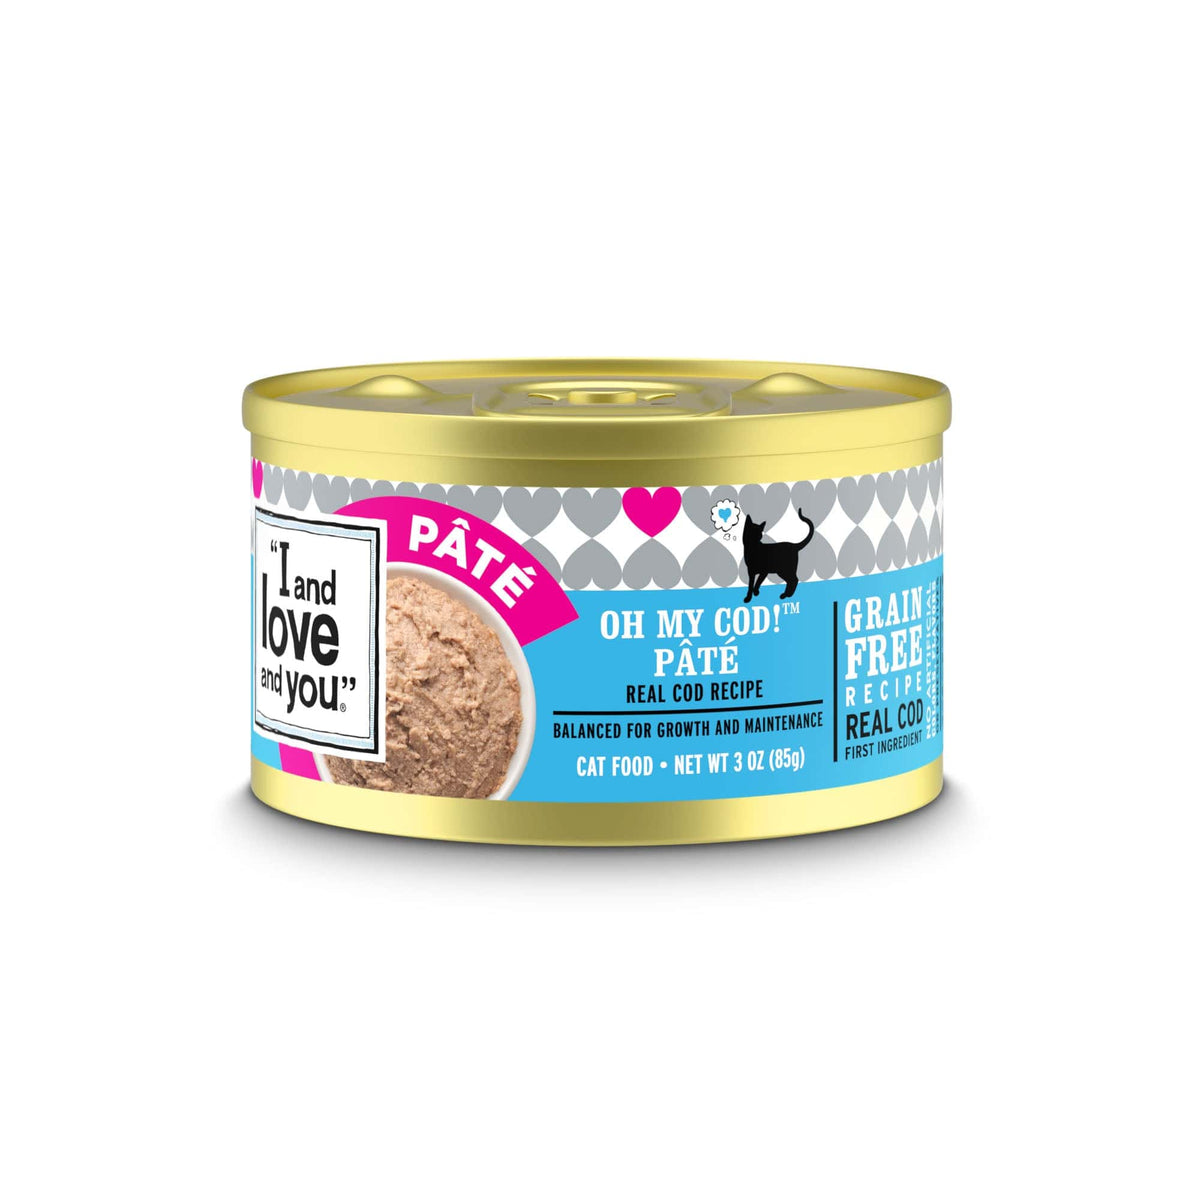 A can of cat food with pâté made of cod.